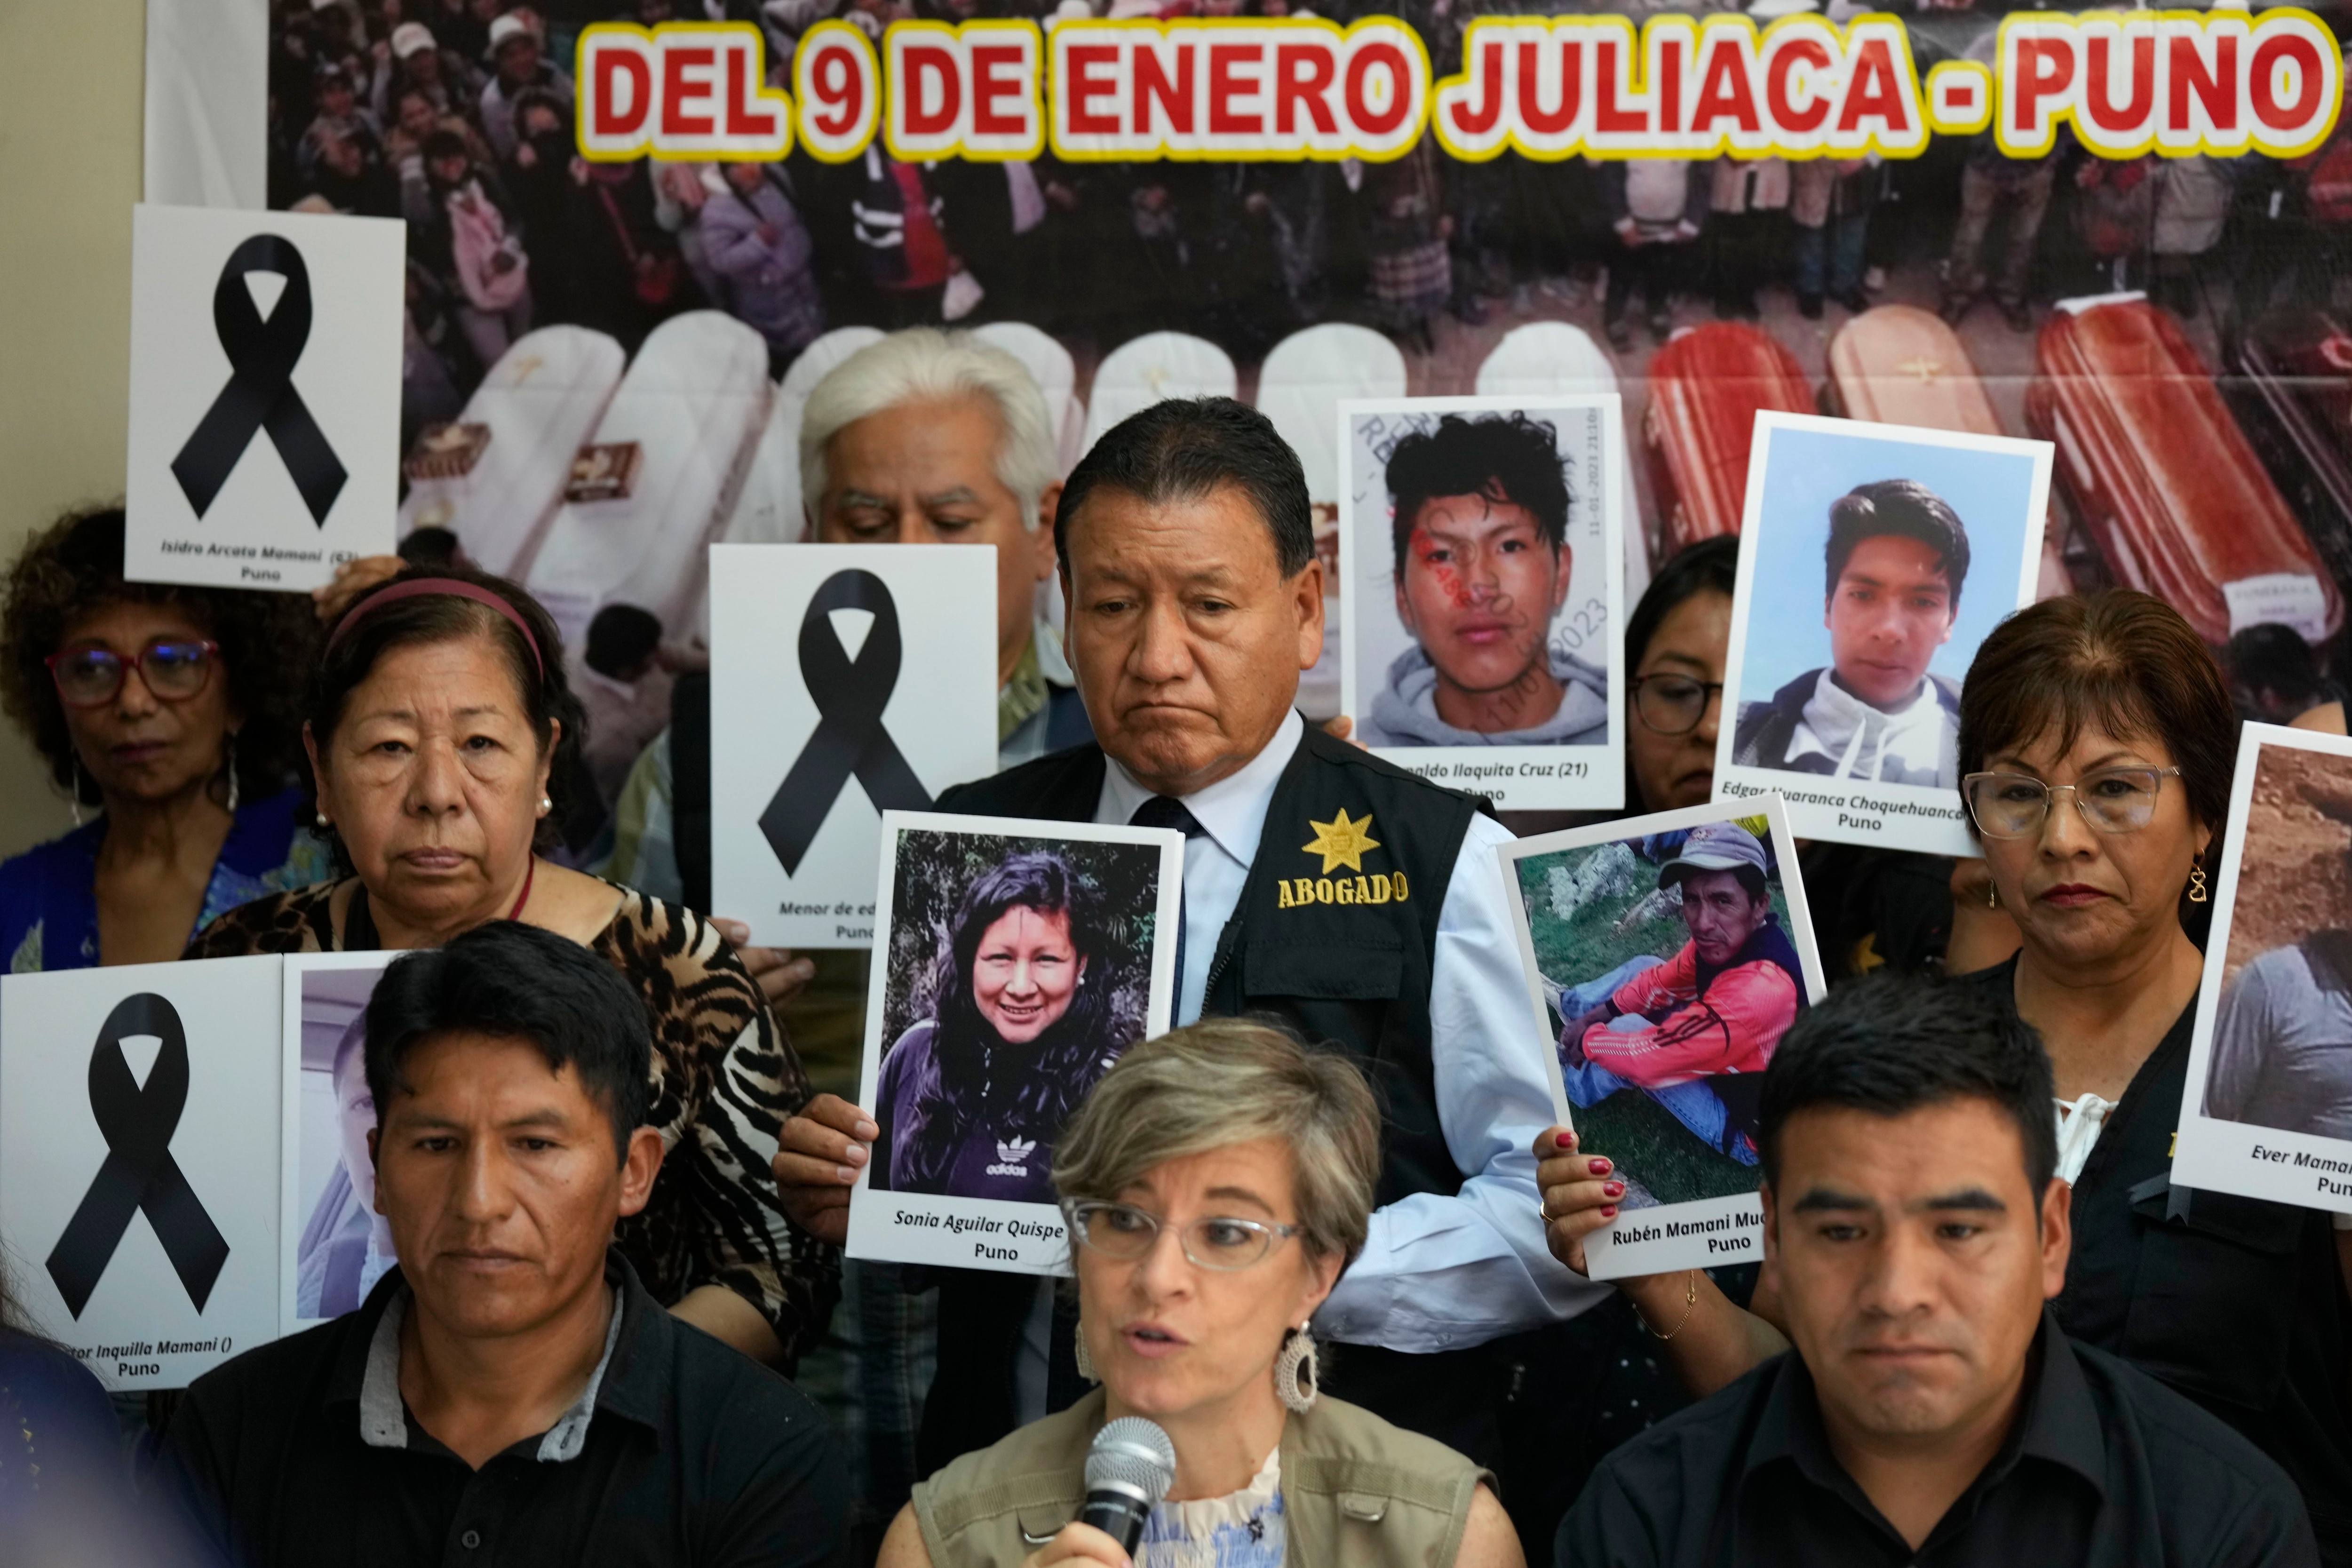 Relatives of demonstrators killed in the protests show photos of the victims at a news conference in Lima, Peru, Thursday, February 23, 2023. Peru is in the midst of a political crisis as government critics call for the resignation of President Dina Boluarte and members of Congress, after former President Pedro Castillo was ousted in December and arrested for trying to dissolve Congress.  (AP Photo/Martín Mejía)